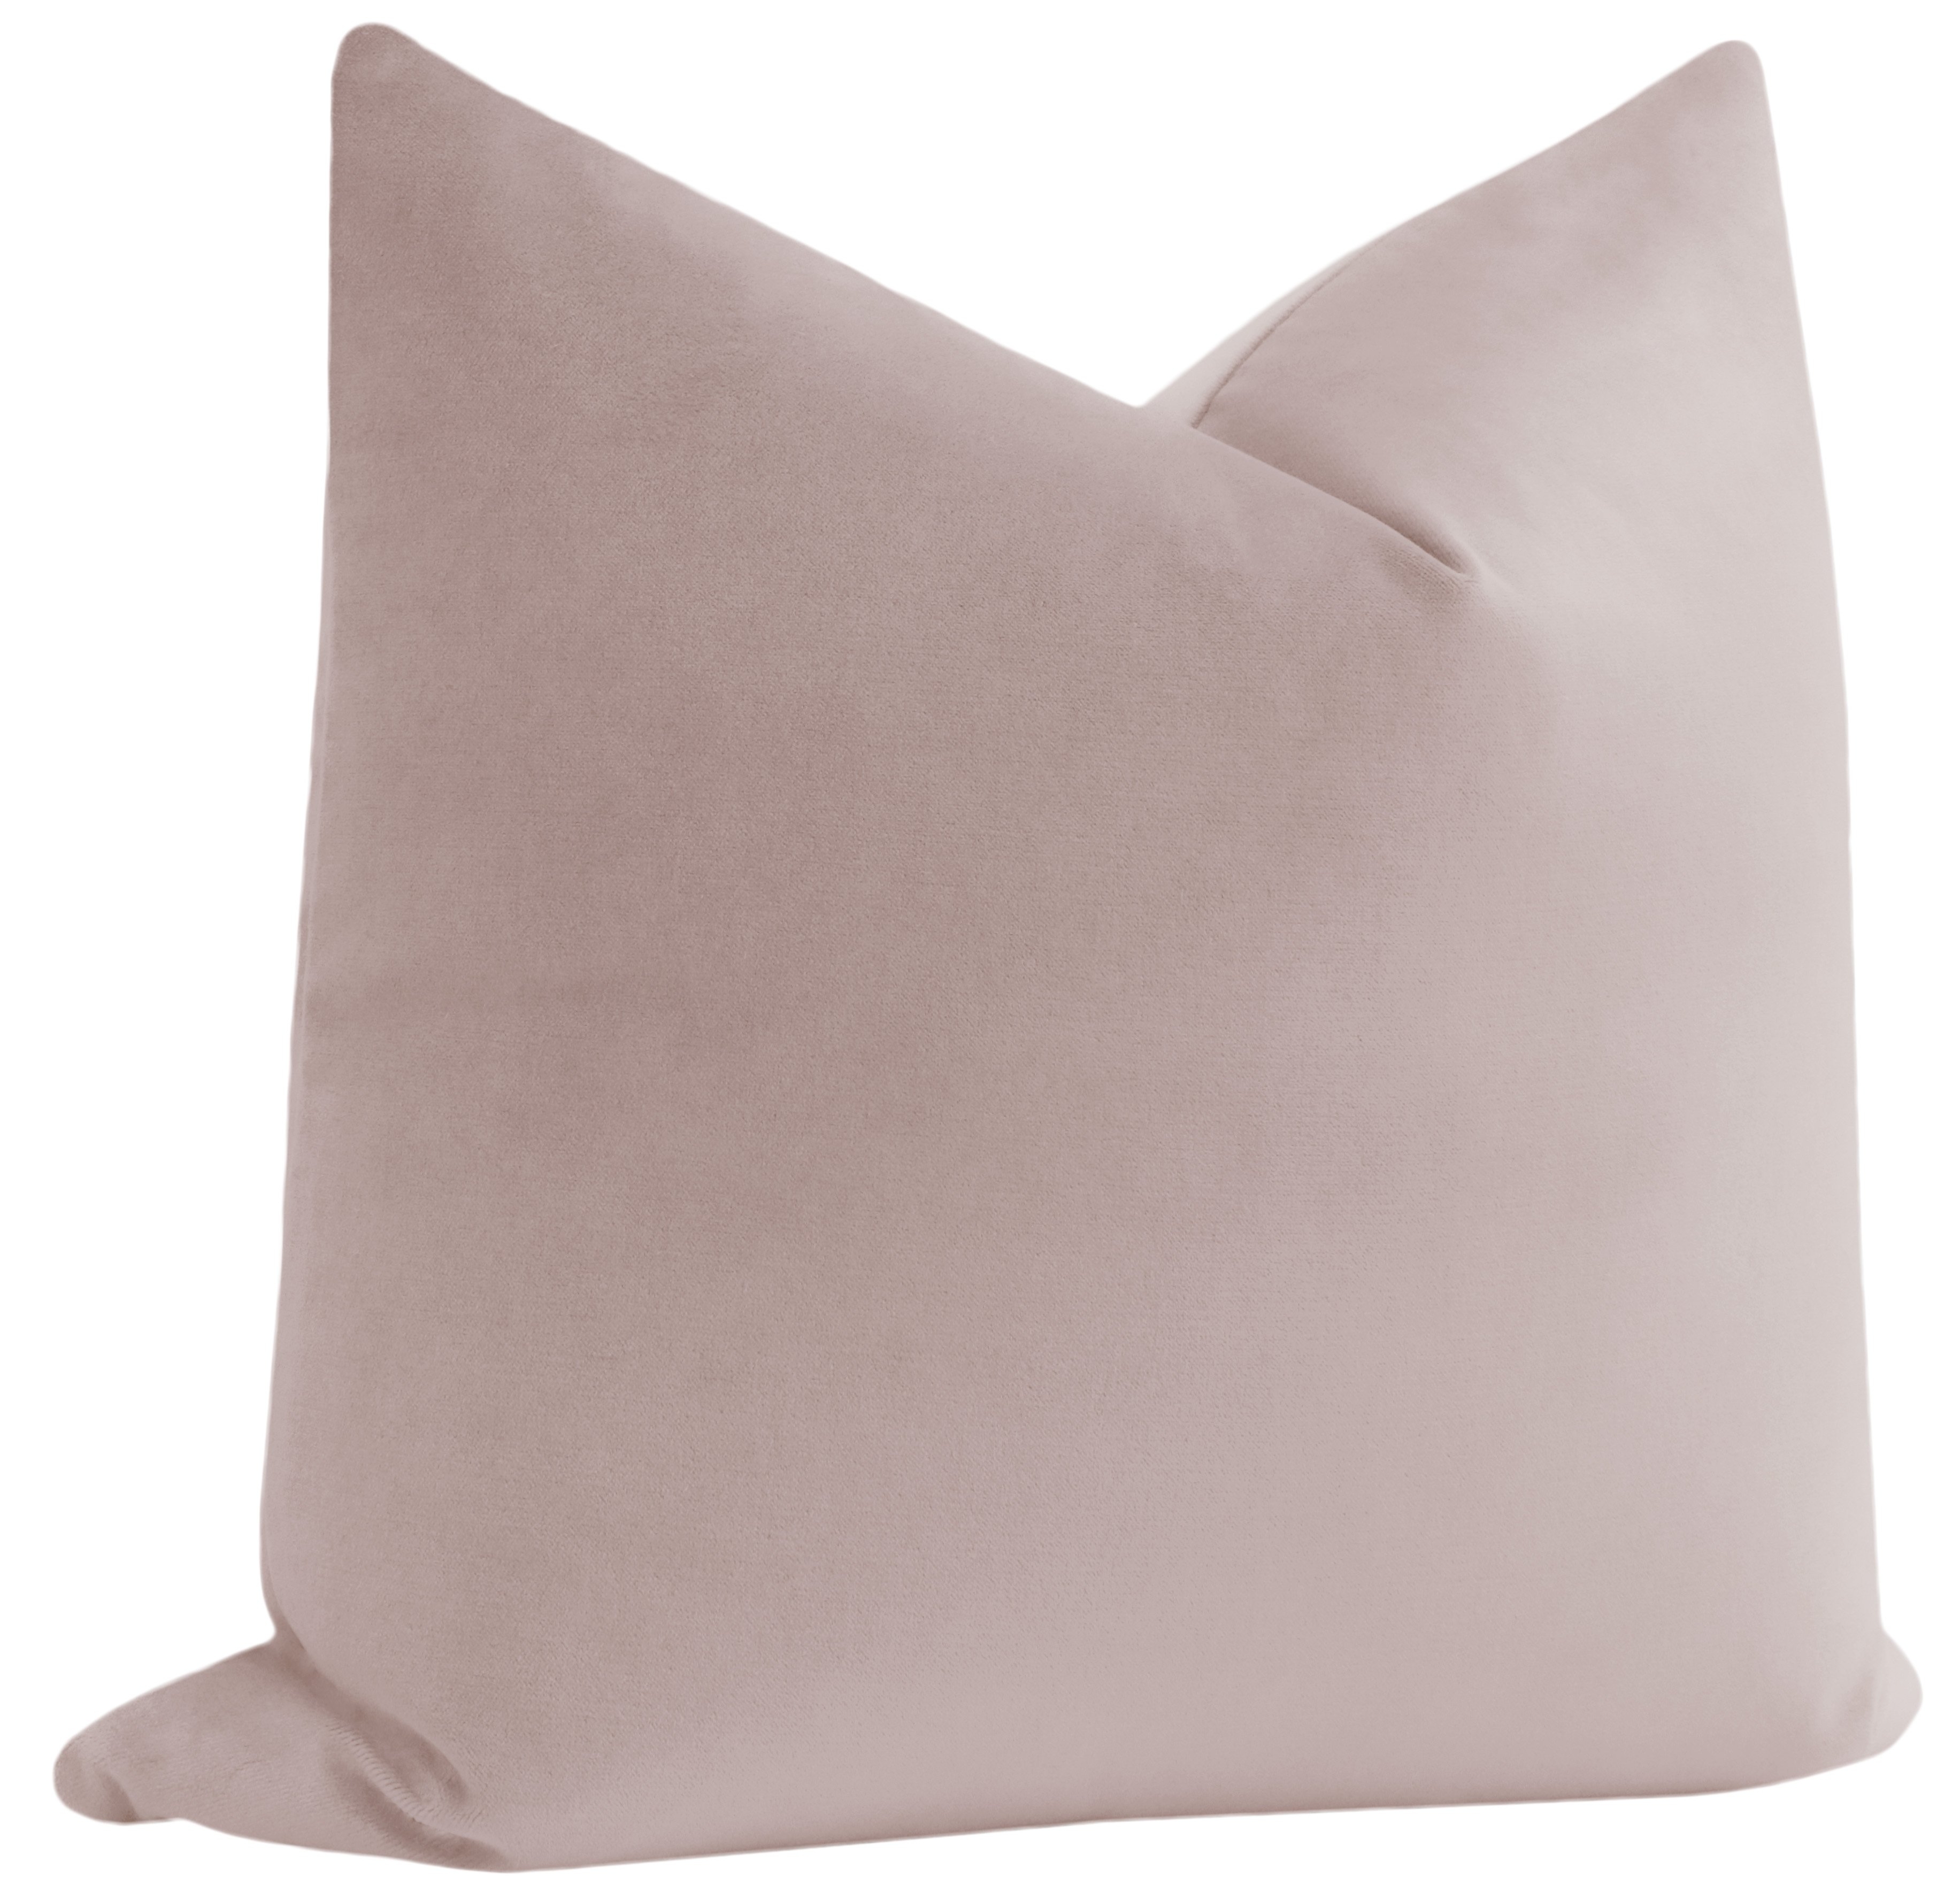 Velvet Collection Pillow Cover, Smokey Lilac, 20" x 20" - Image 1